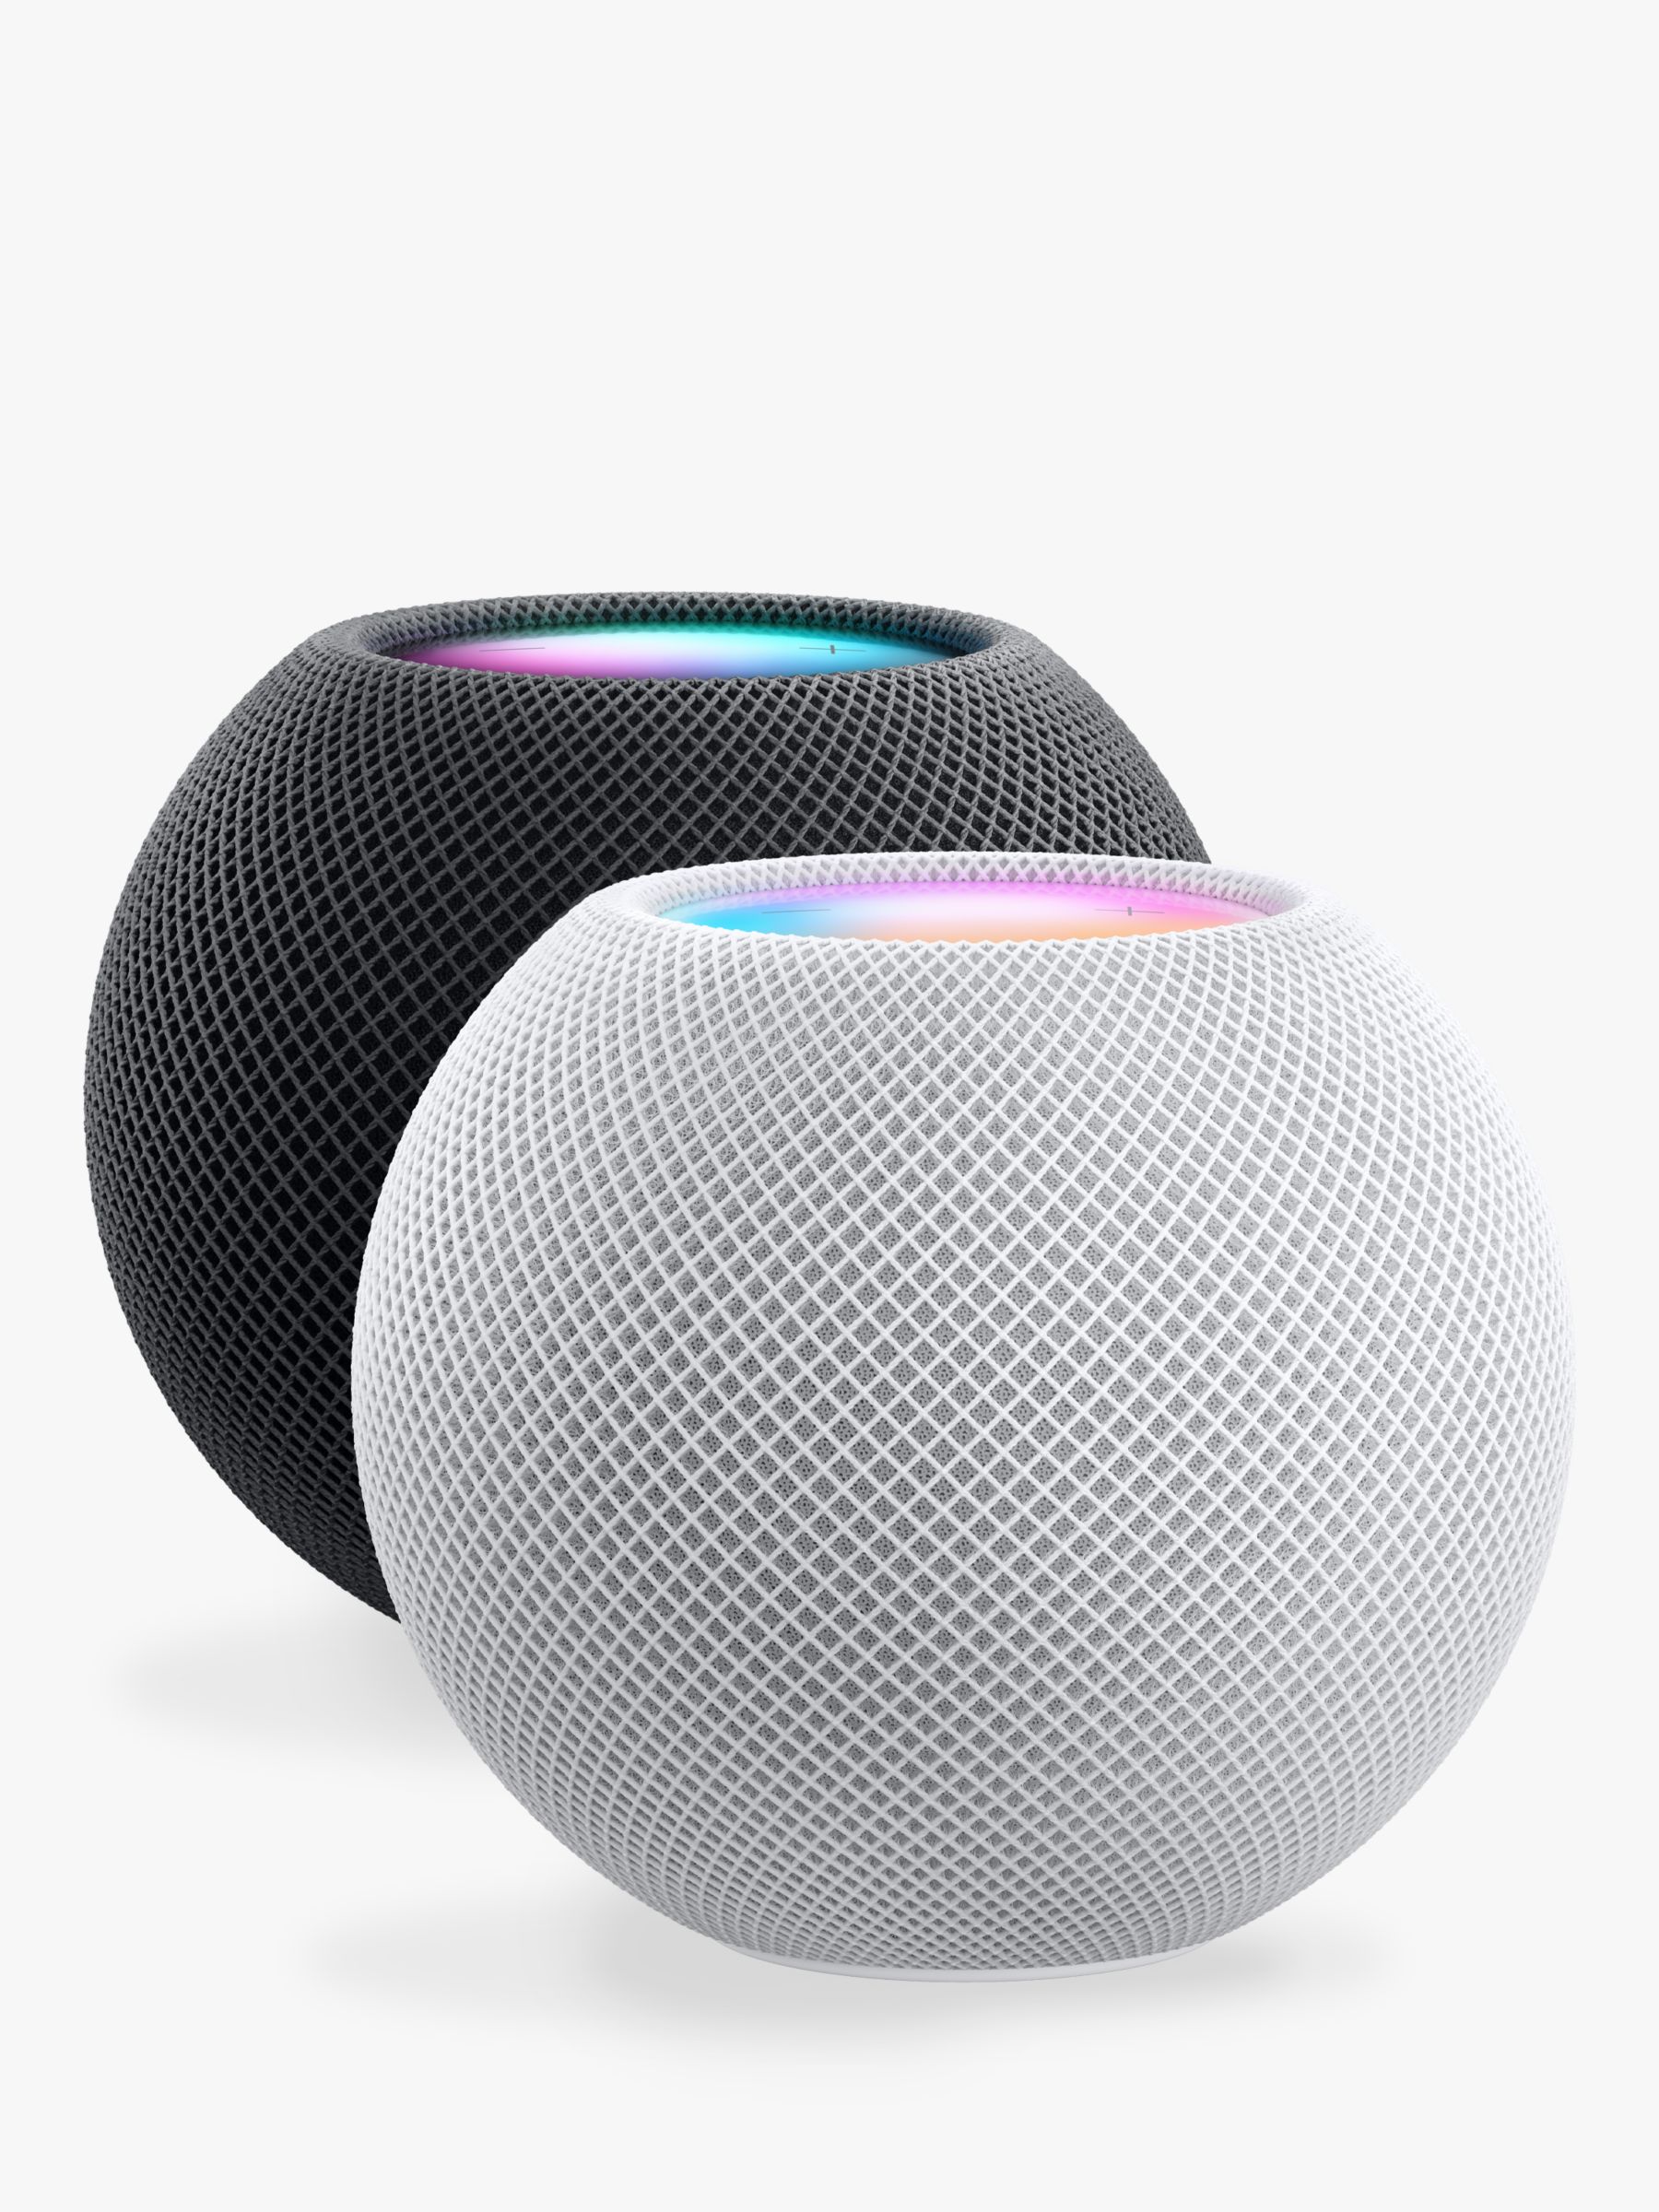 Apple HomePod mini space grey delivery ready today 